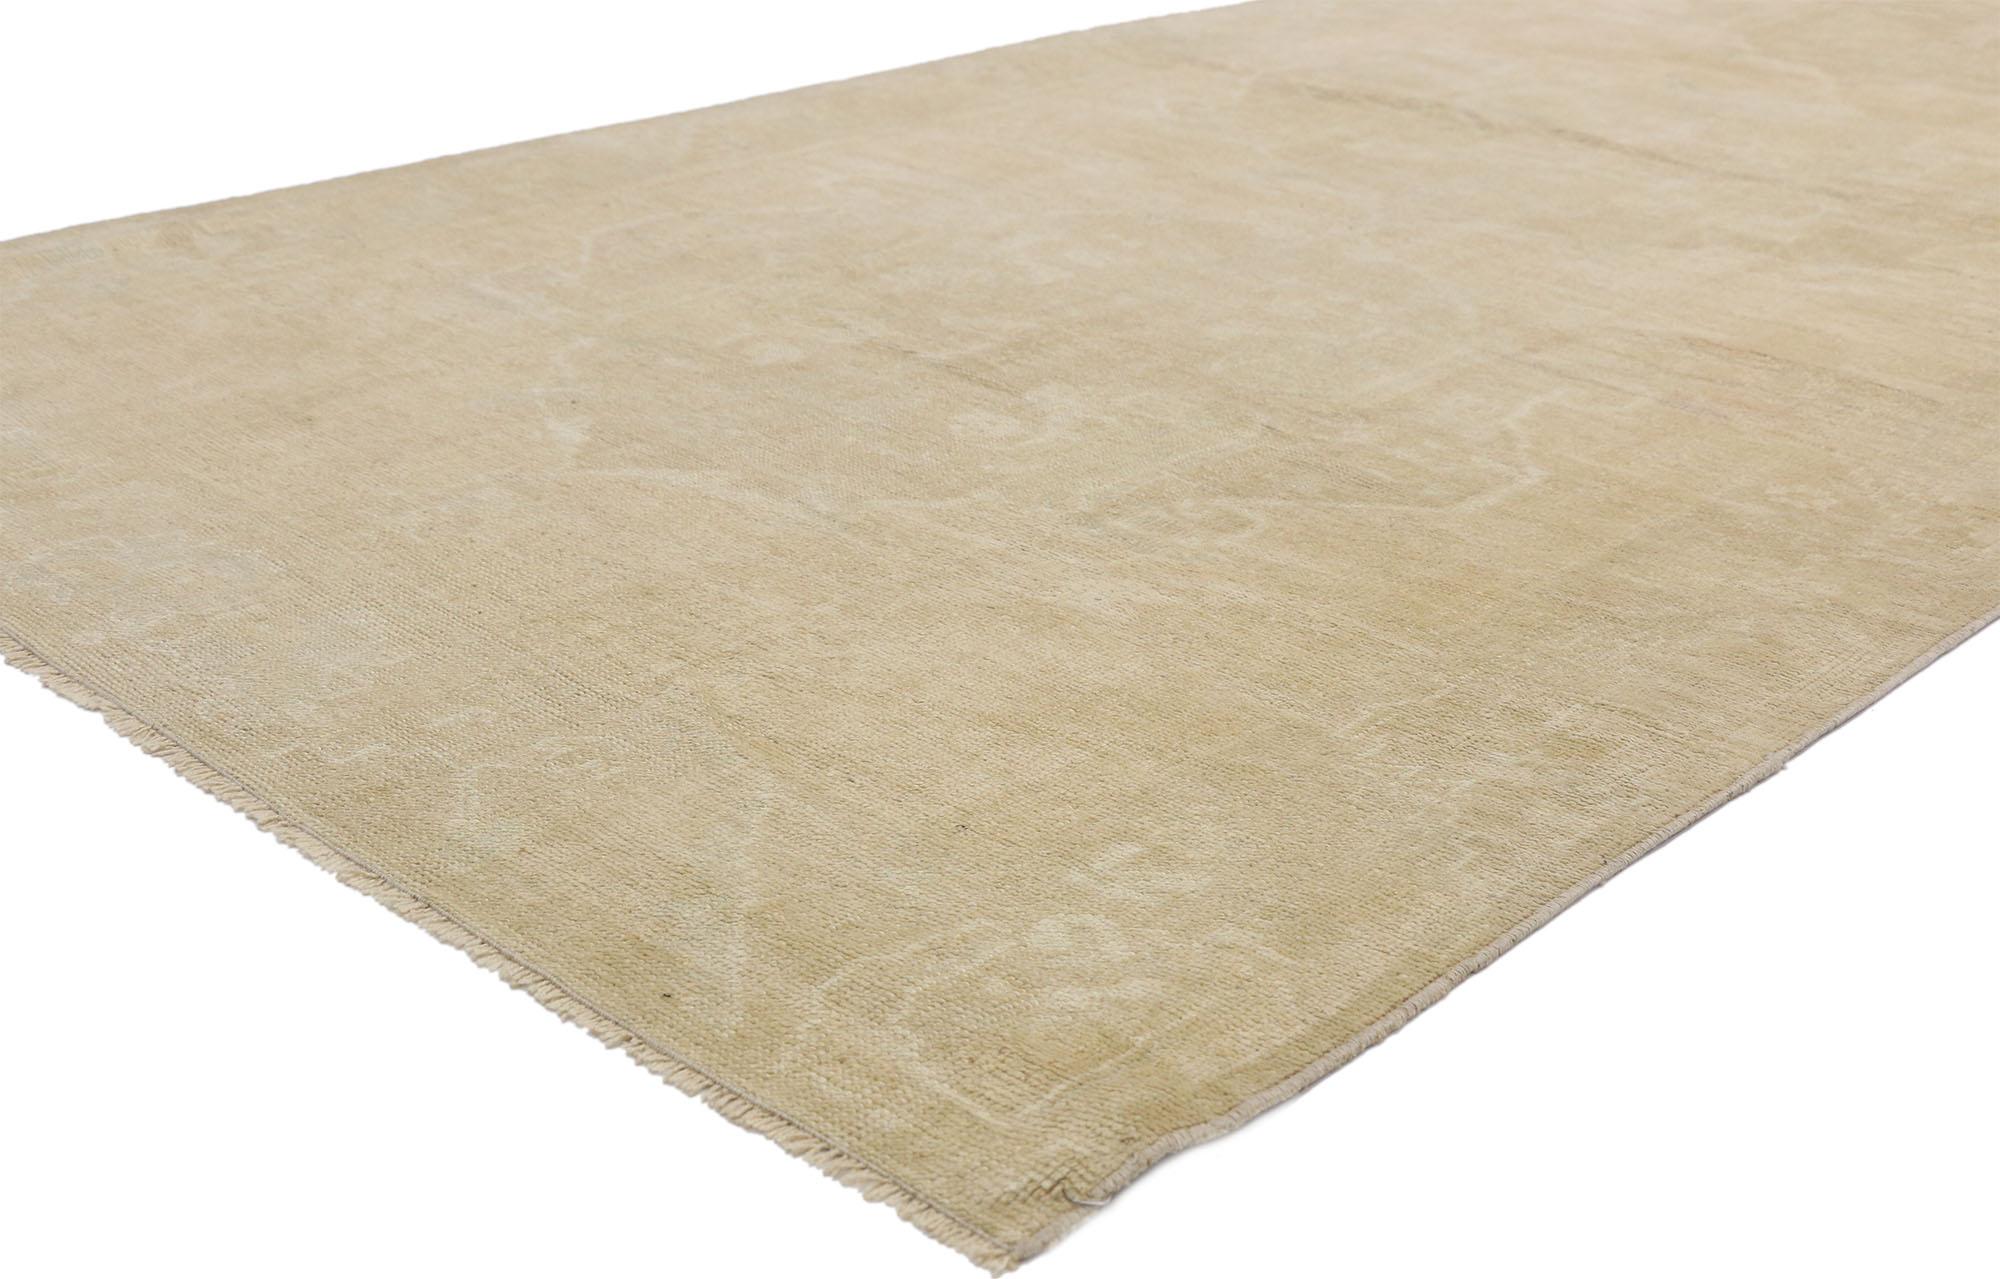 52503, vintage Turkish Oushak rug with Transitional style and neutral colors, wide hallway runner. This hand knotted wool vintage Turkish Oushak runner features three ethereal medallions in an open abrashed field. It is enclosed with a subtle